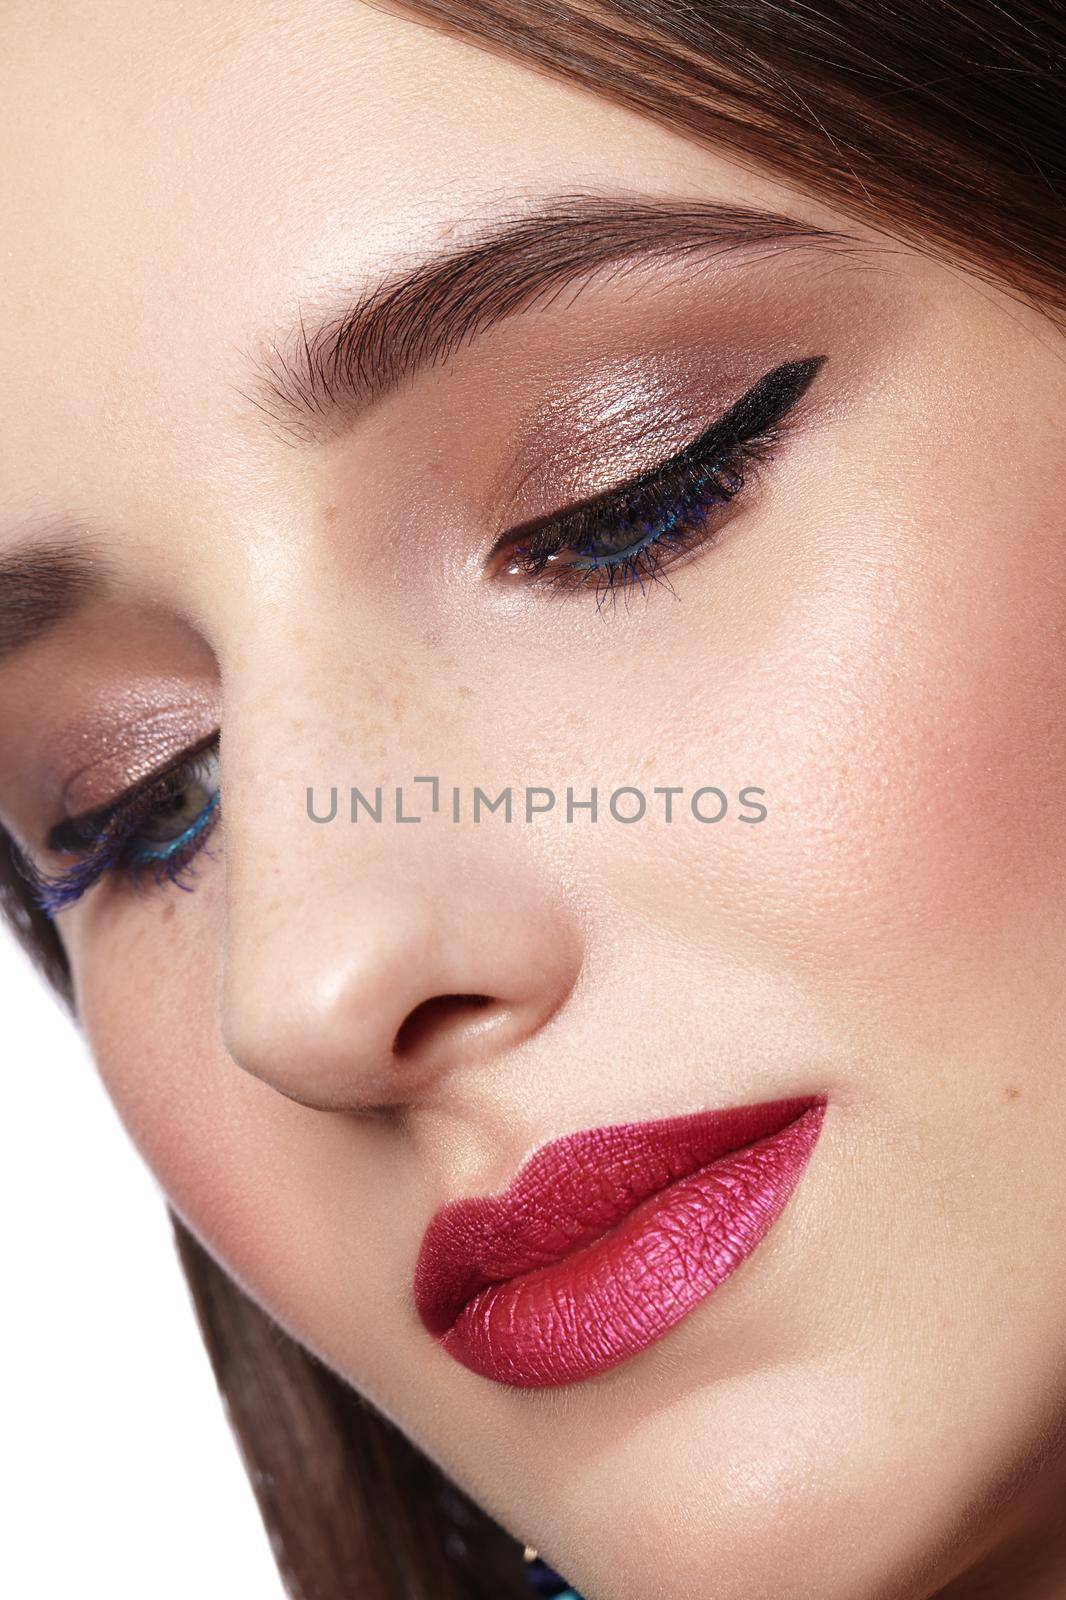 Beautiful Woman with Professional Makeup. Celebrate Style Eye Make-up, Perfect Eyebrows, Shine Skin. Bright Fashion Look.